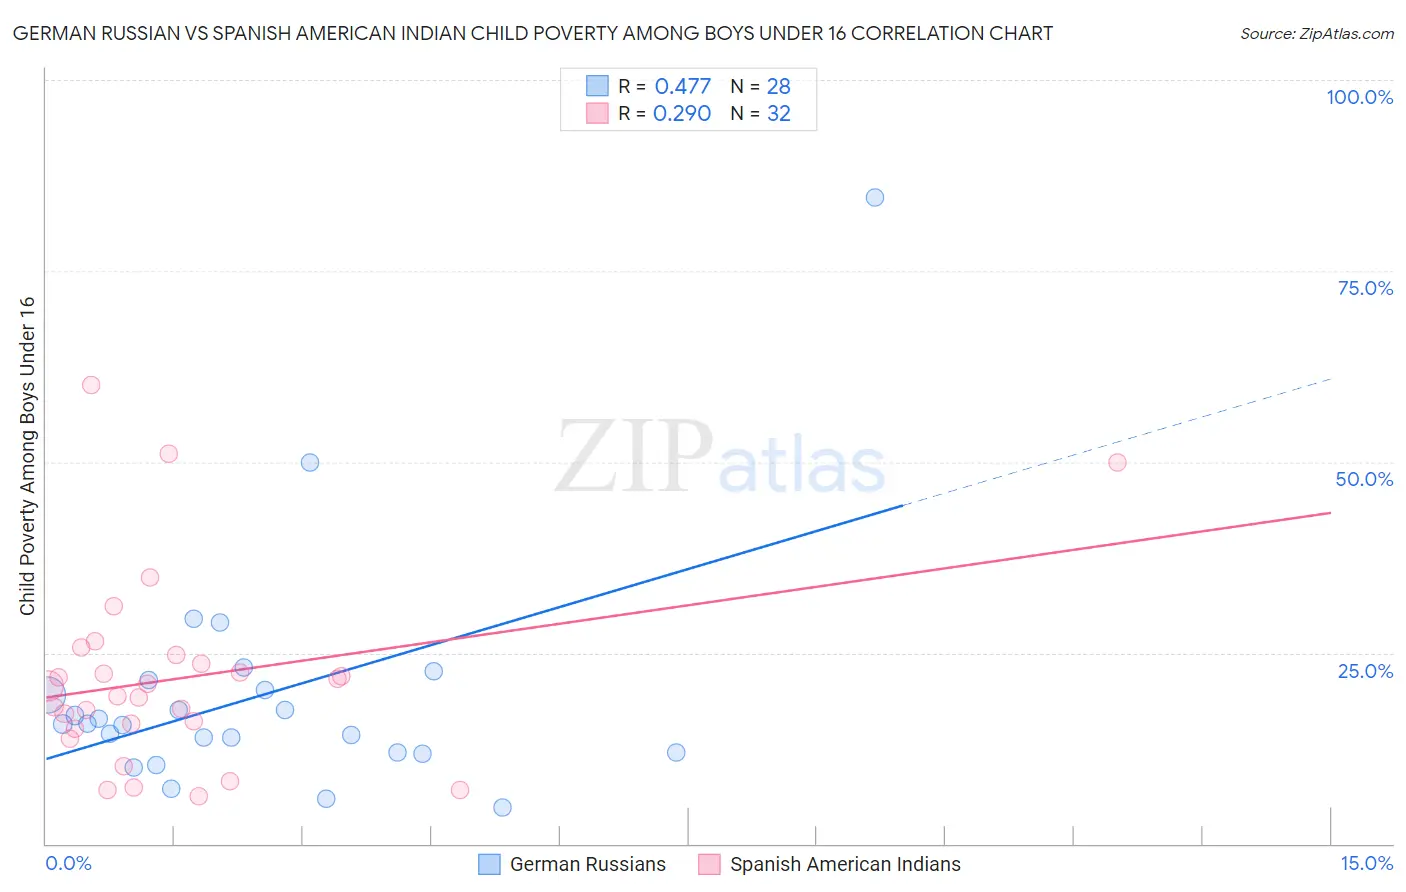 German Russian vs Spanish American Indian Child Poverty Among Boys Under 16